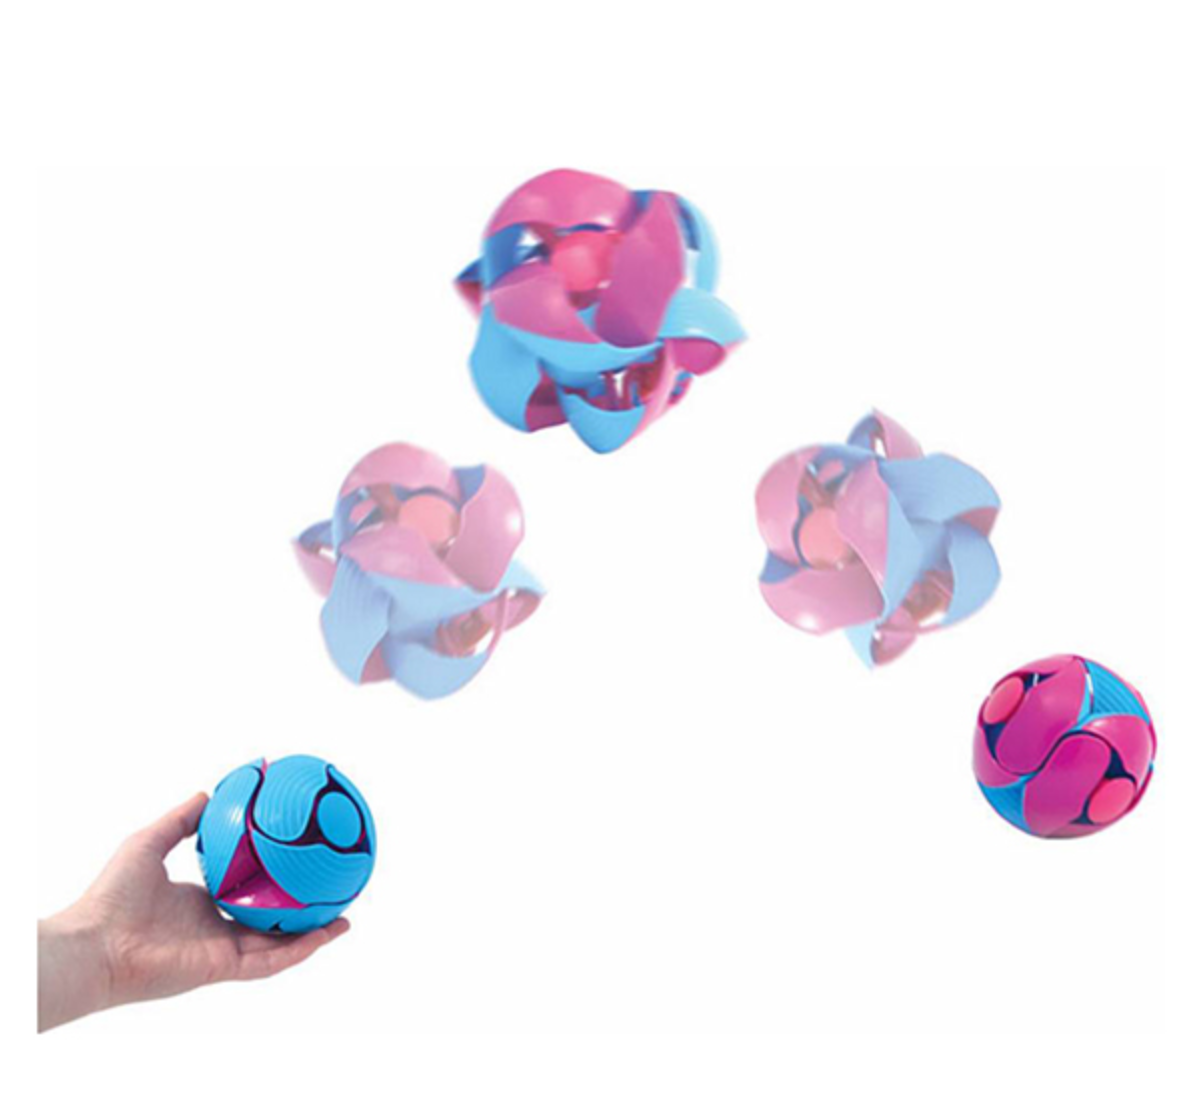 hoberman switch pitch variety color transform handheld color flip toss juggle ages 4+ transformation switches colorful variety fun toy toys gift entertaining